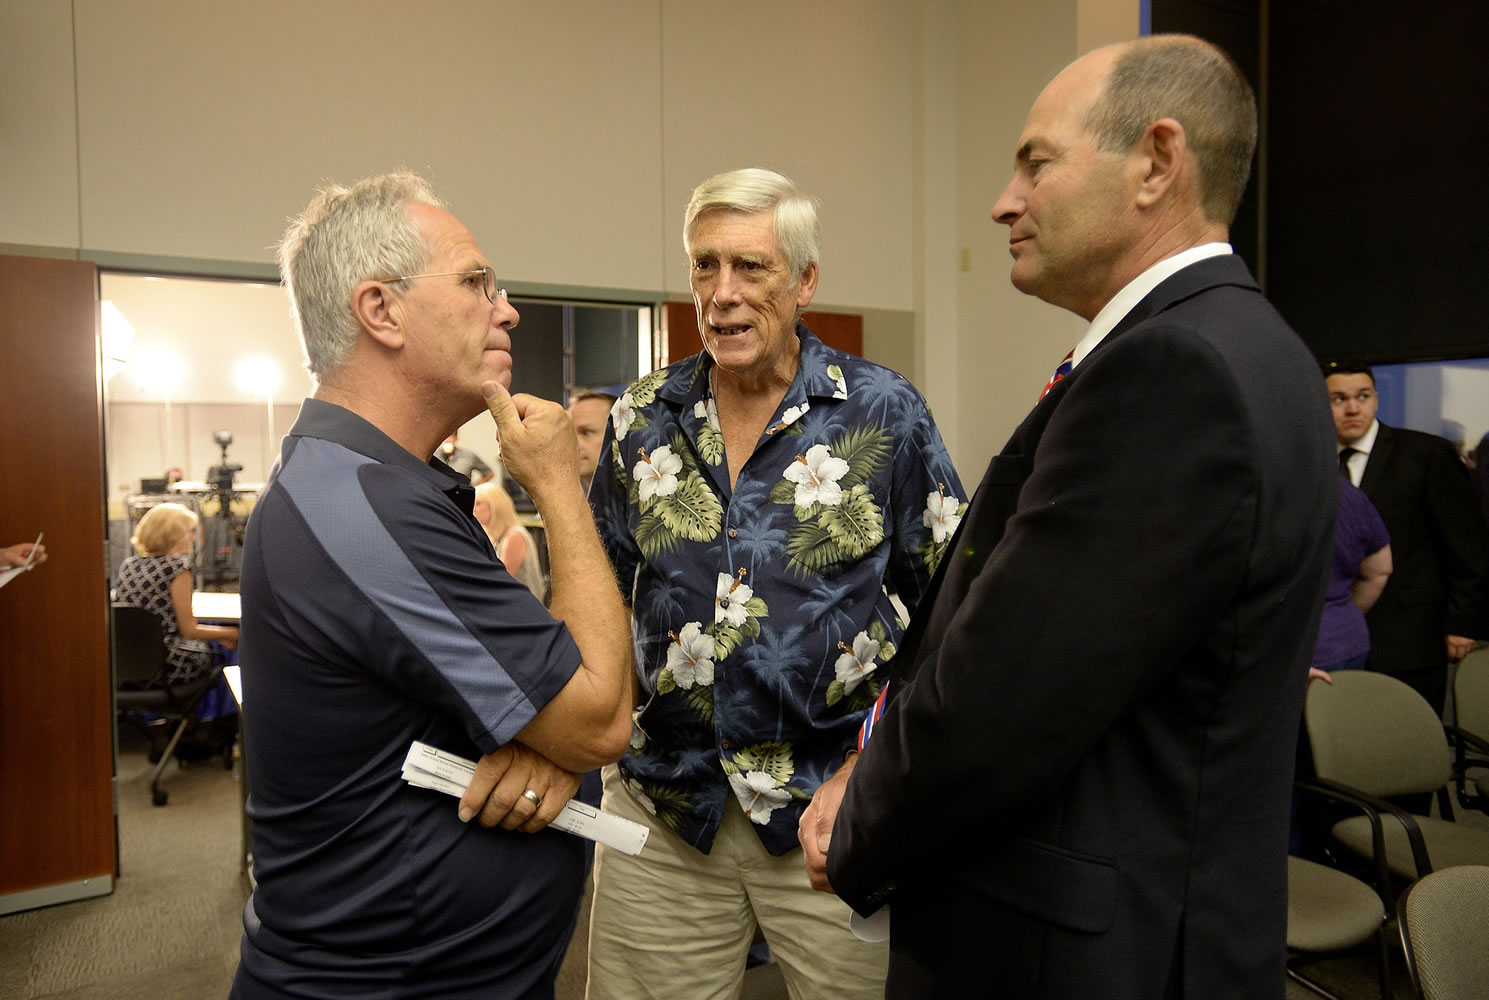 Marc Boldt, left, chats with Michael Langsdorf of Vancouver and Clark County Auditor Greg Kimsey, right, at the county Public Service Center Tuesday night.